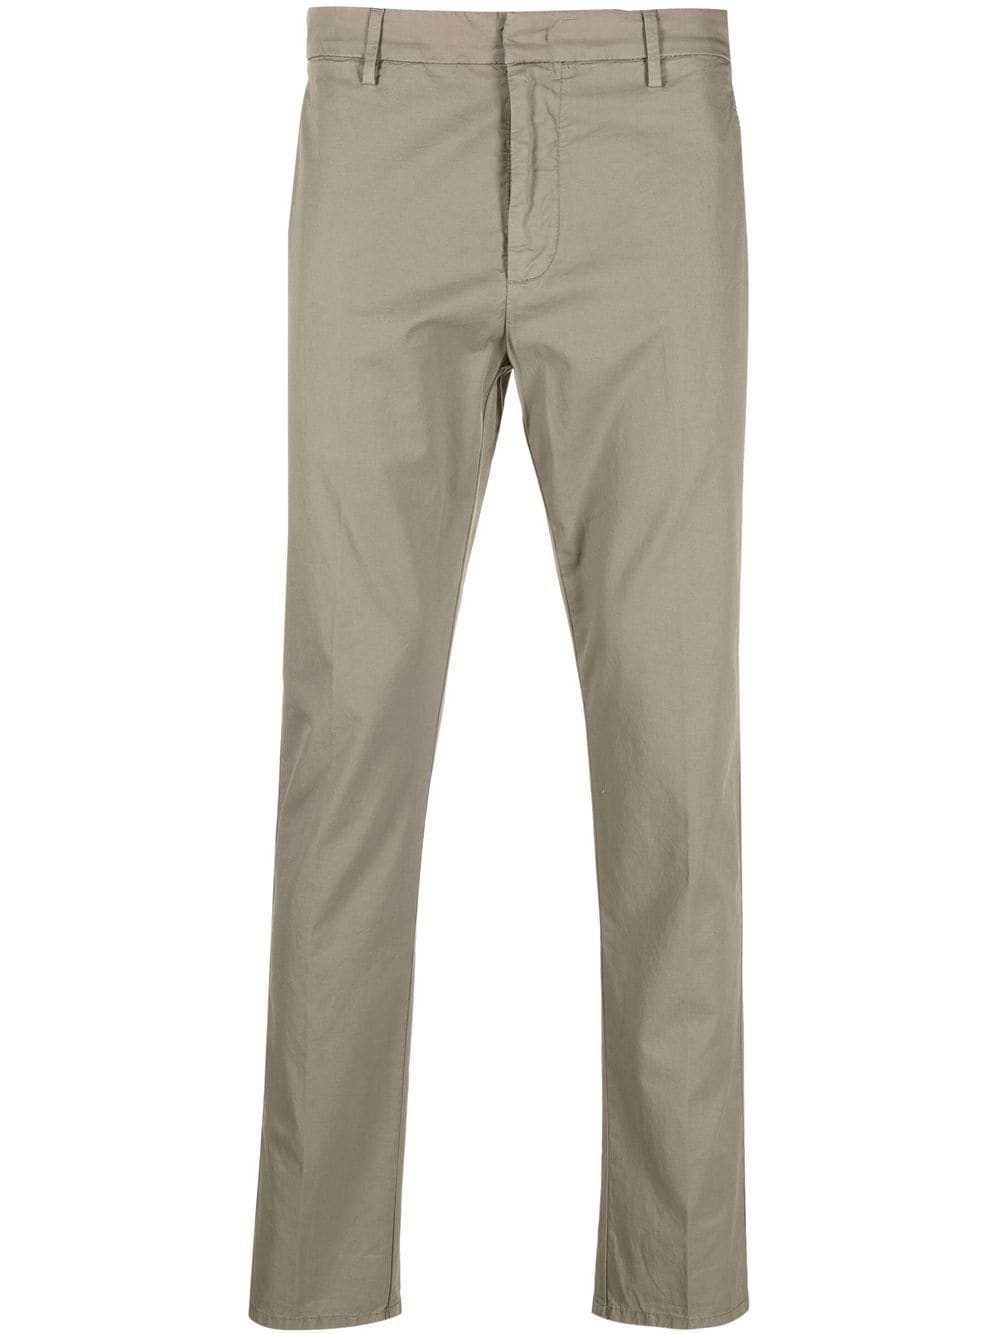 DONDUP relaxed chino trouser - Green von DONDUP